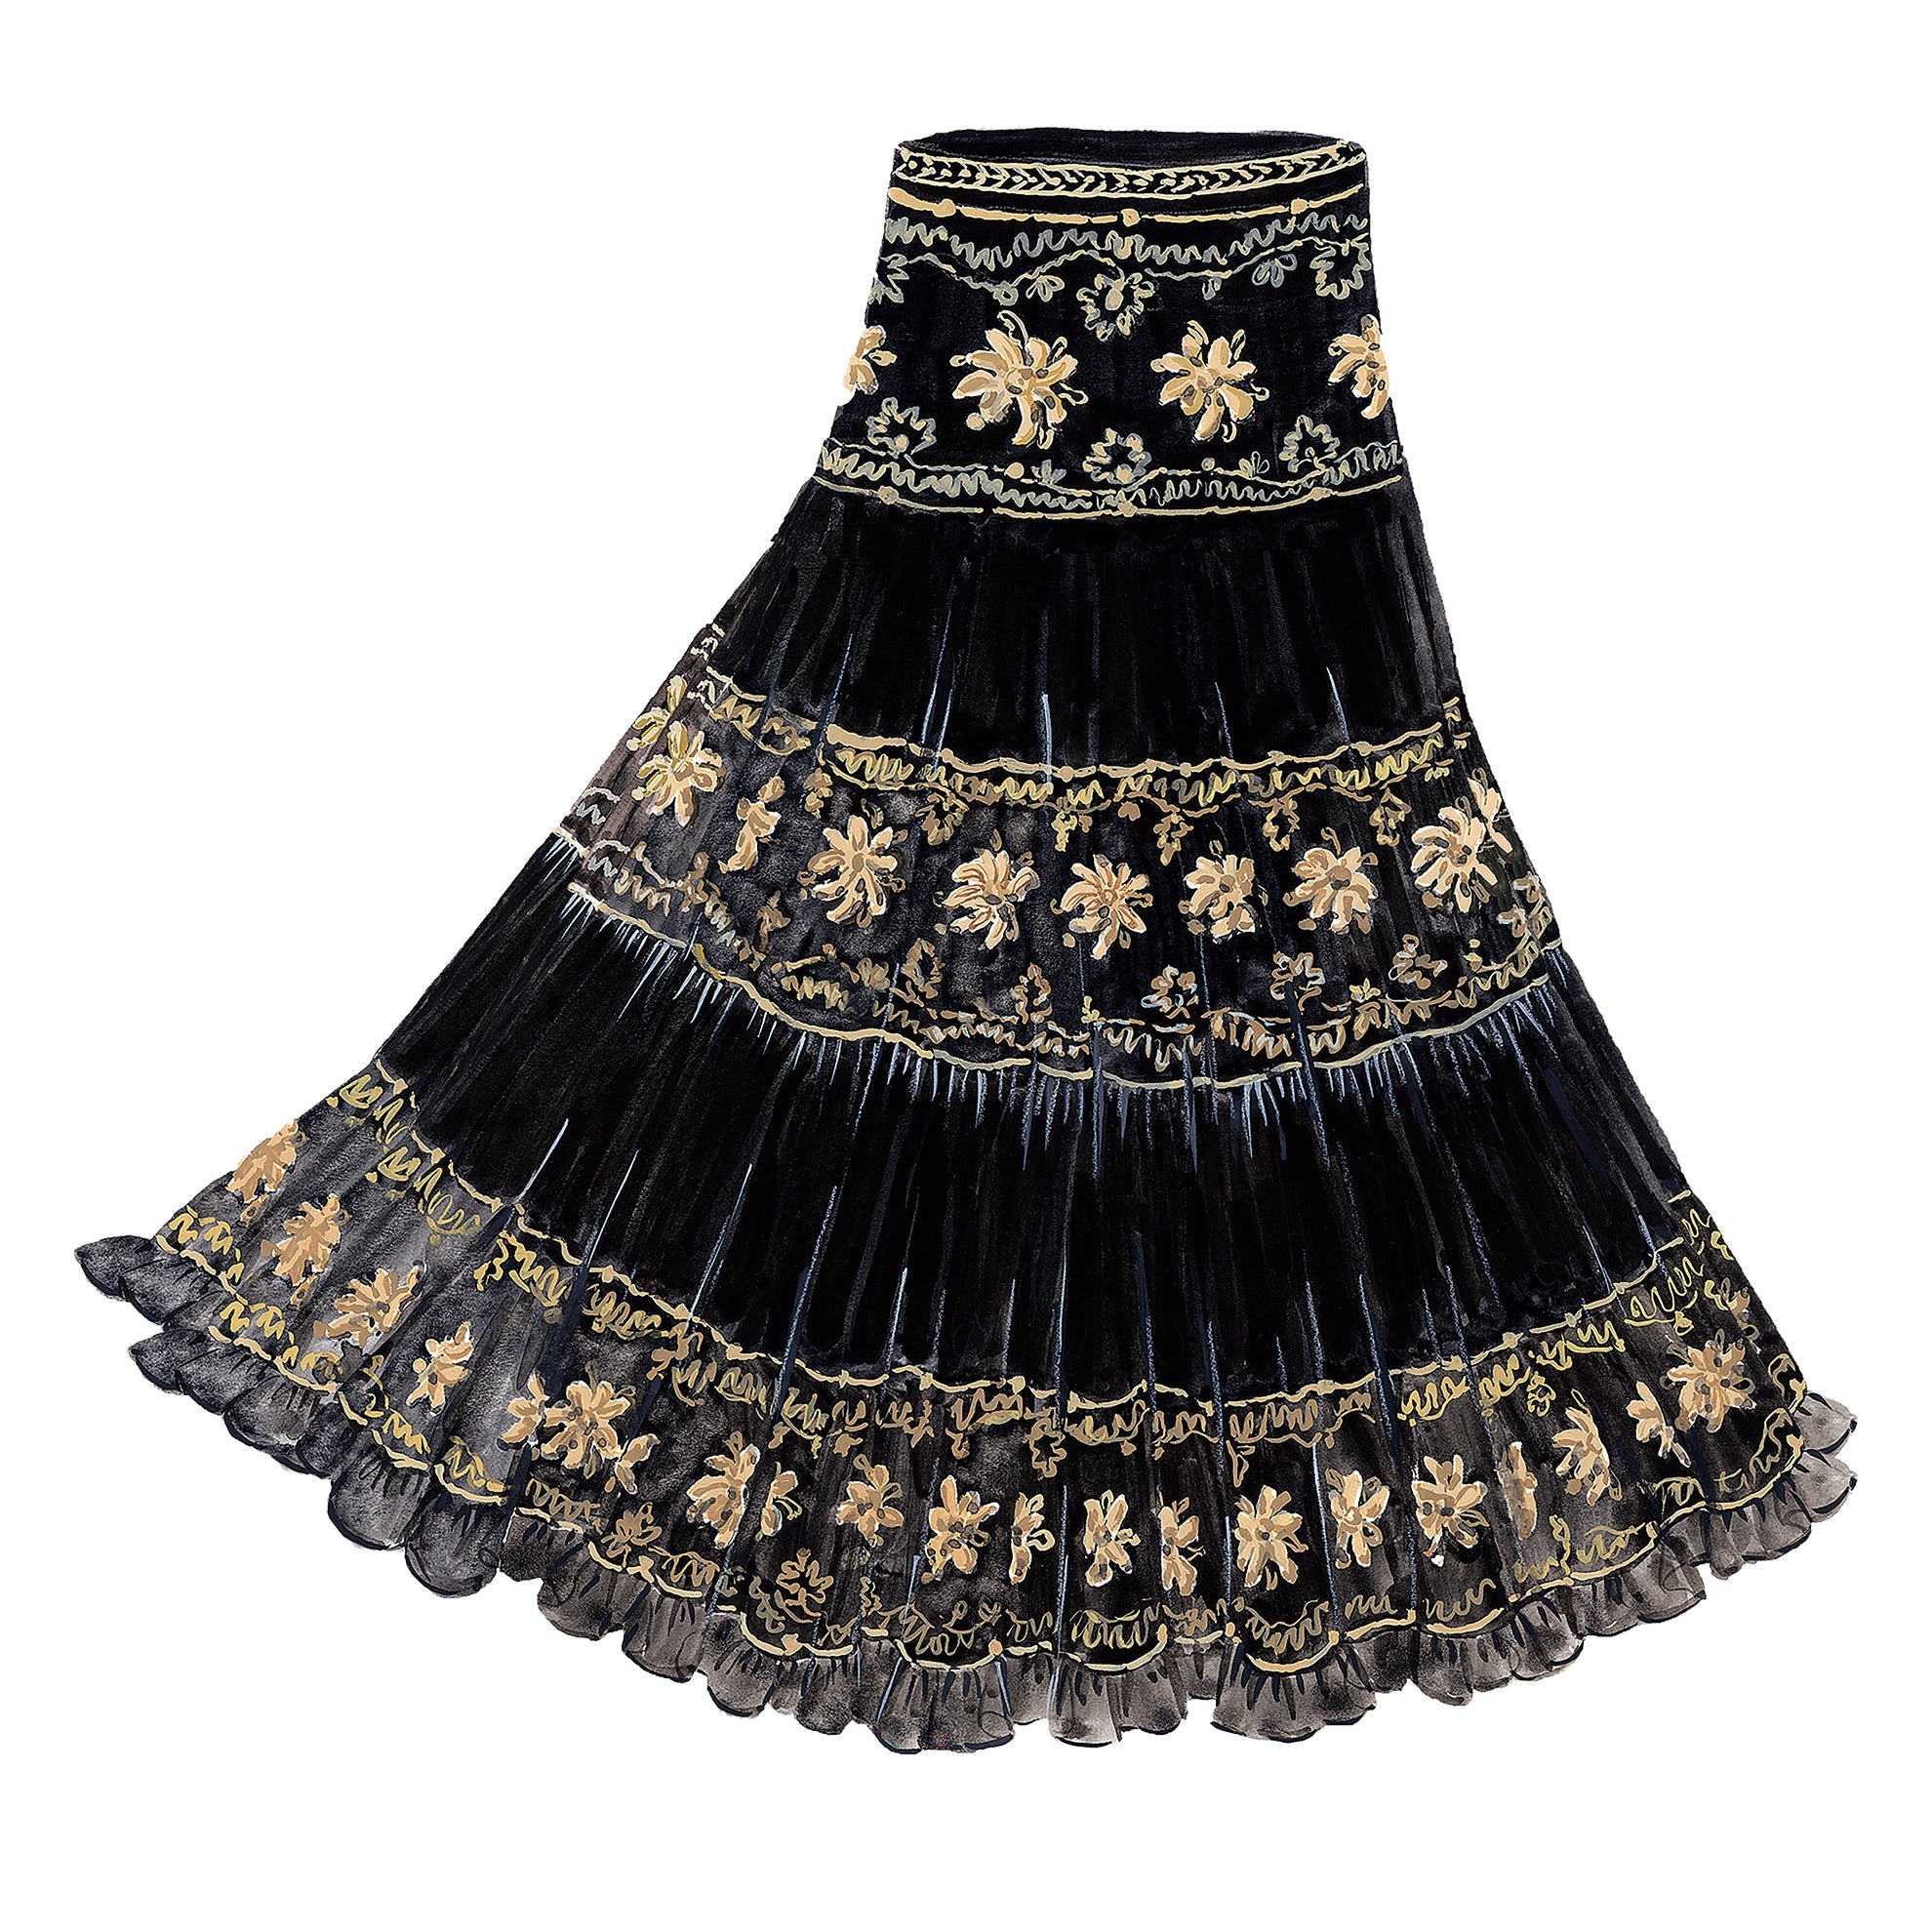 Embroidered Tier Skirt